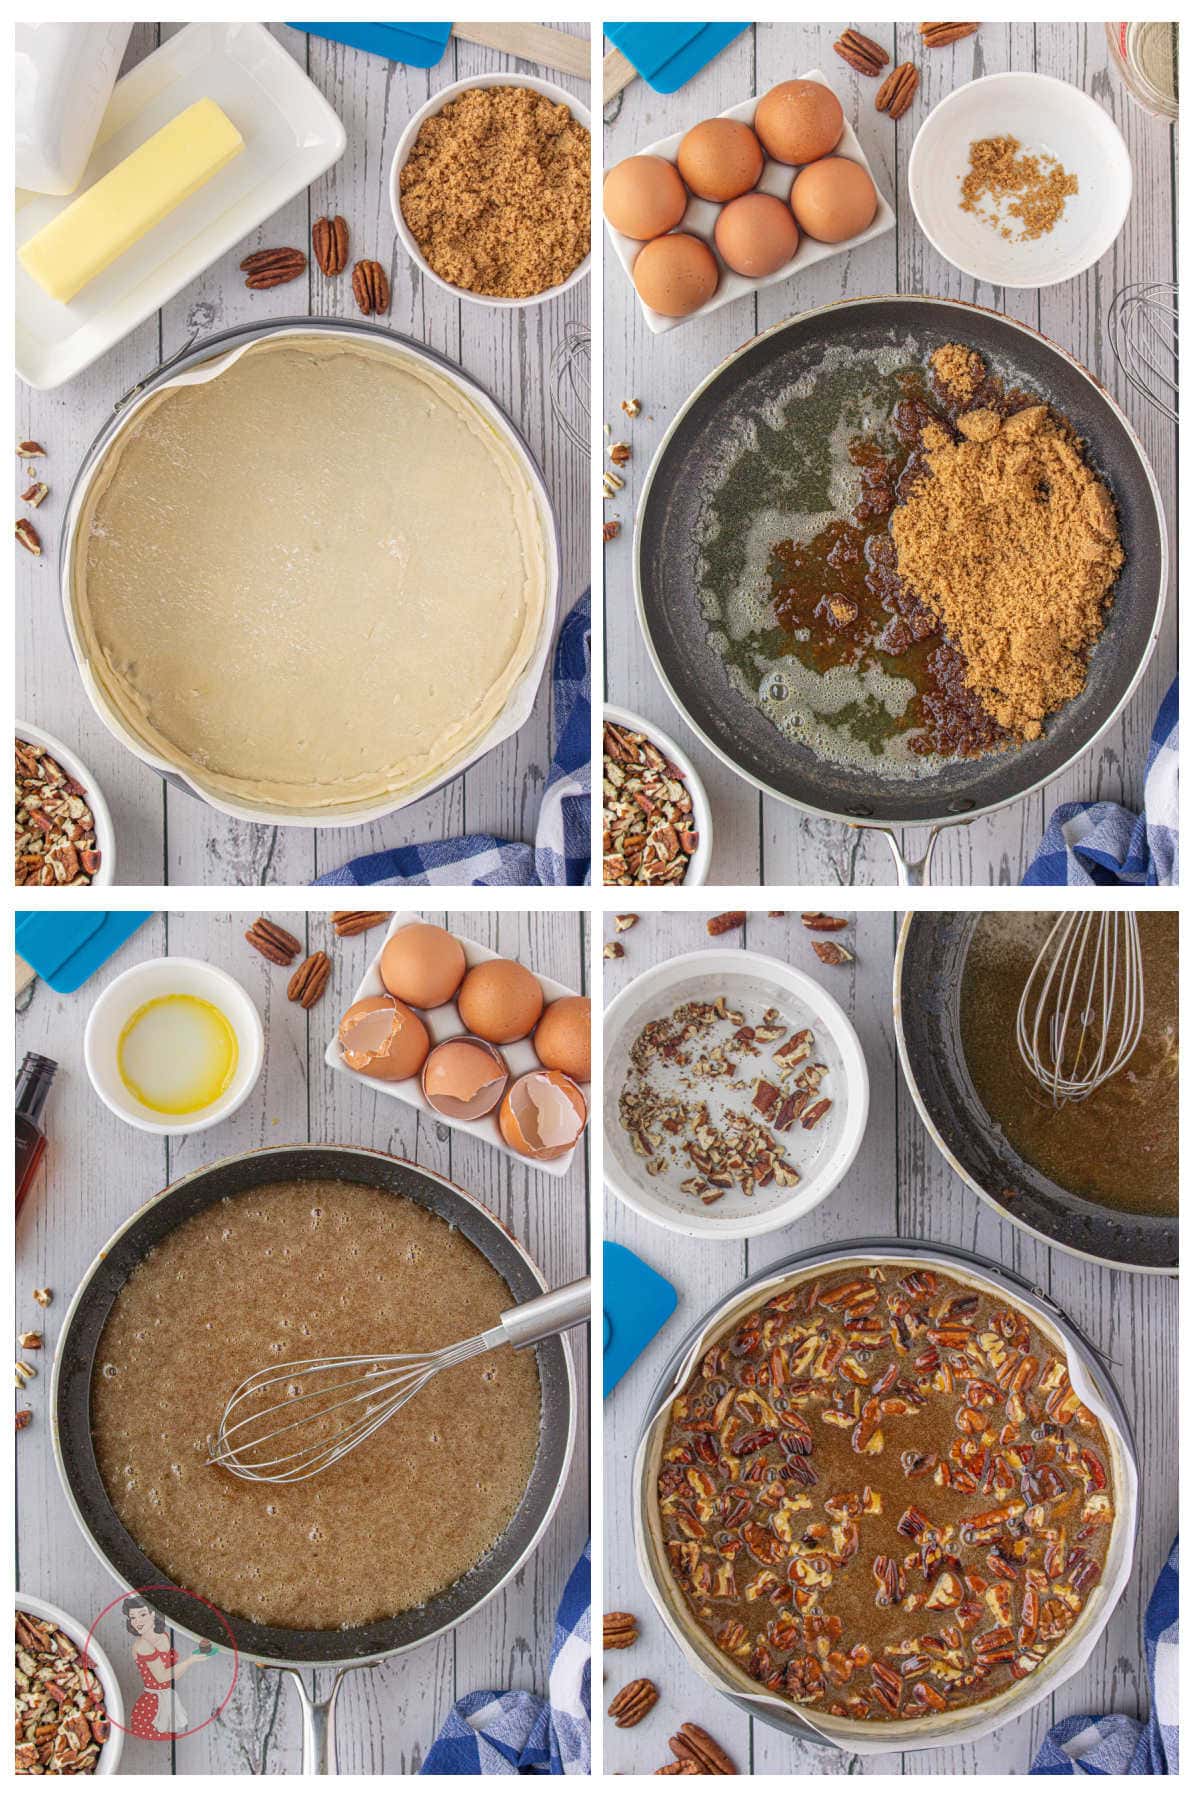 Step by step images showing how to make the pecan pie layer of the cheesecake.